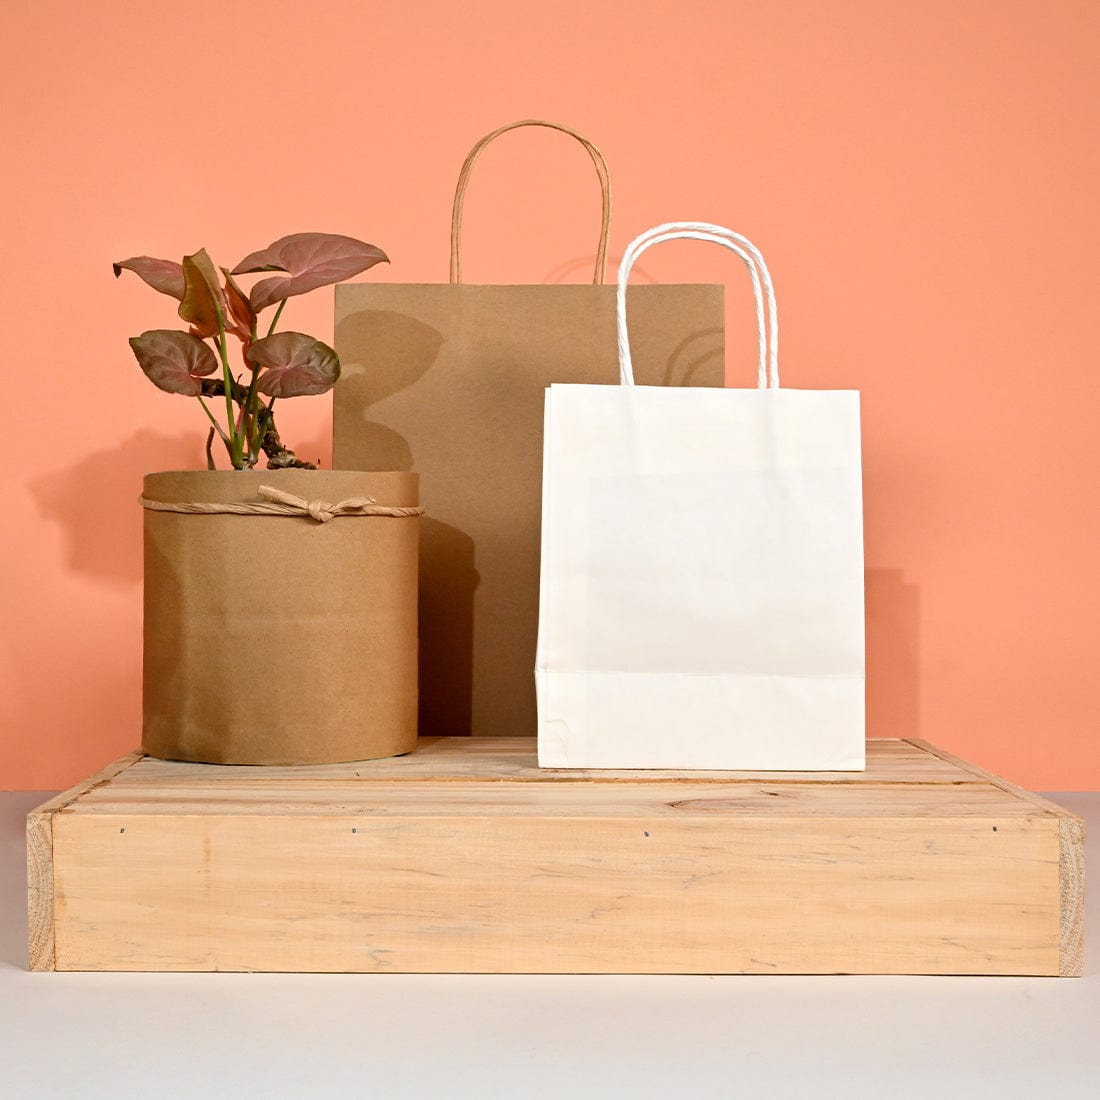 kraft paper bags brown and white